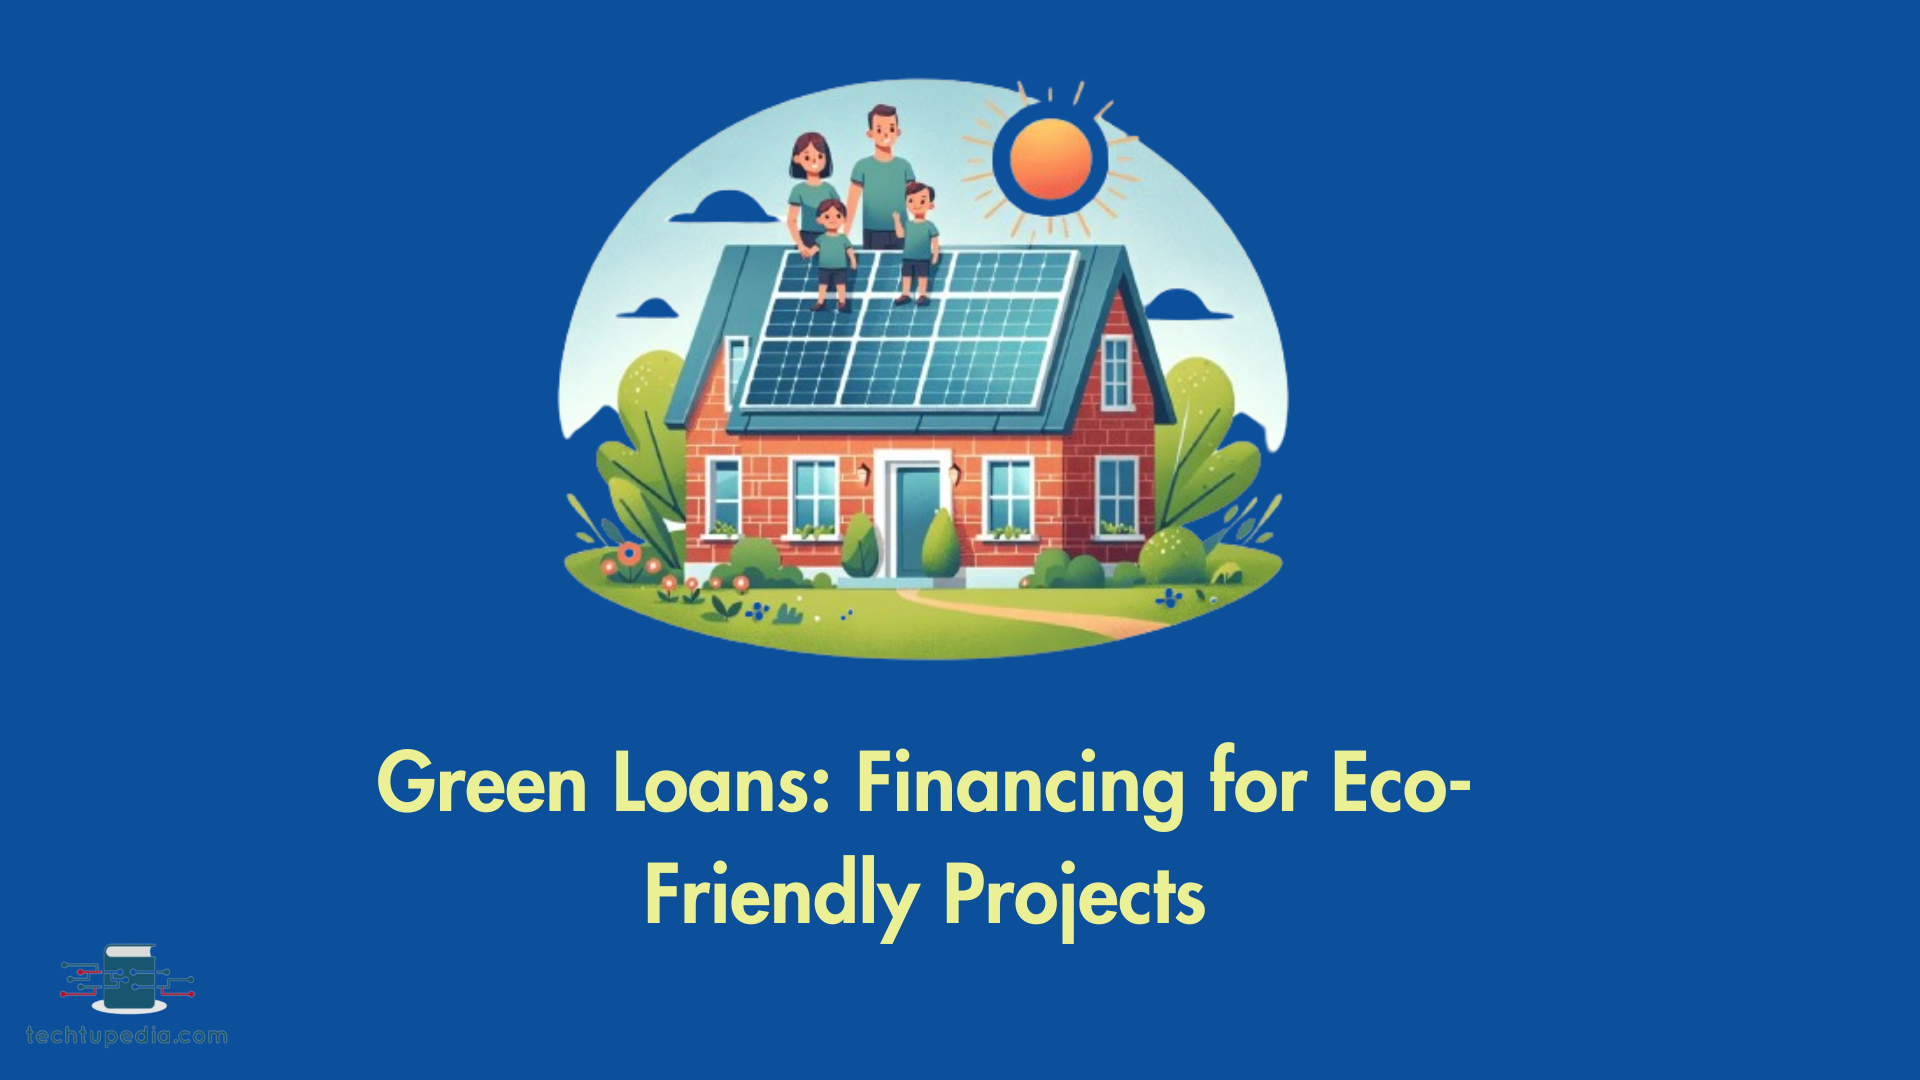 Green Loans: Financing for Eco-Friendly Projects